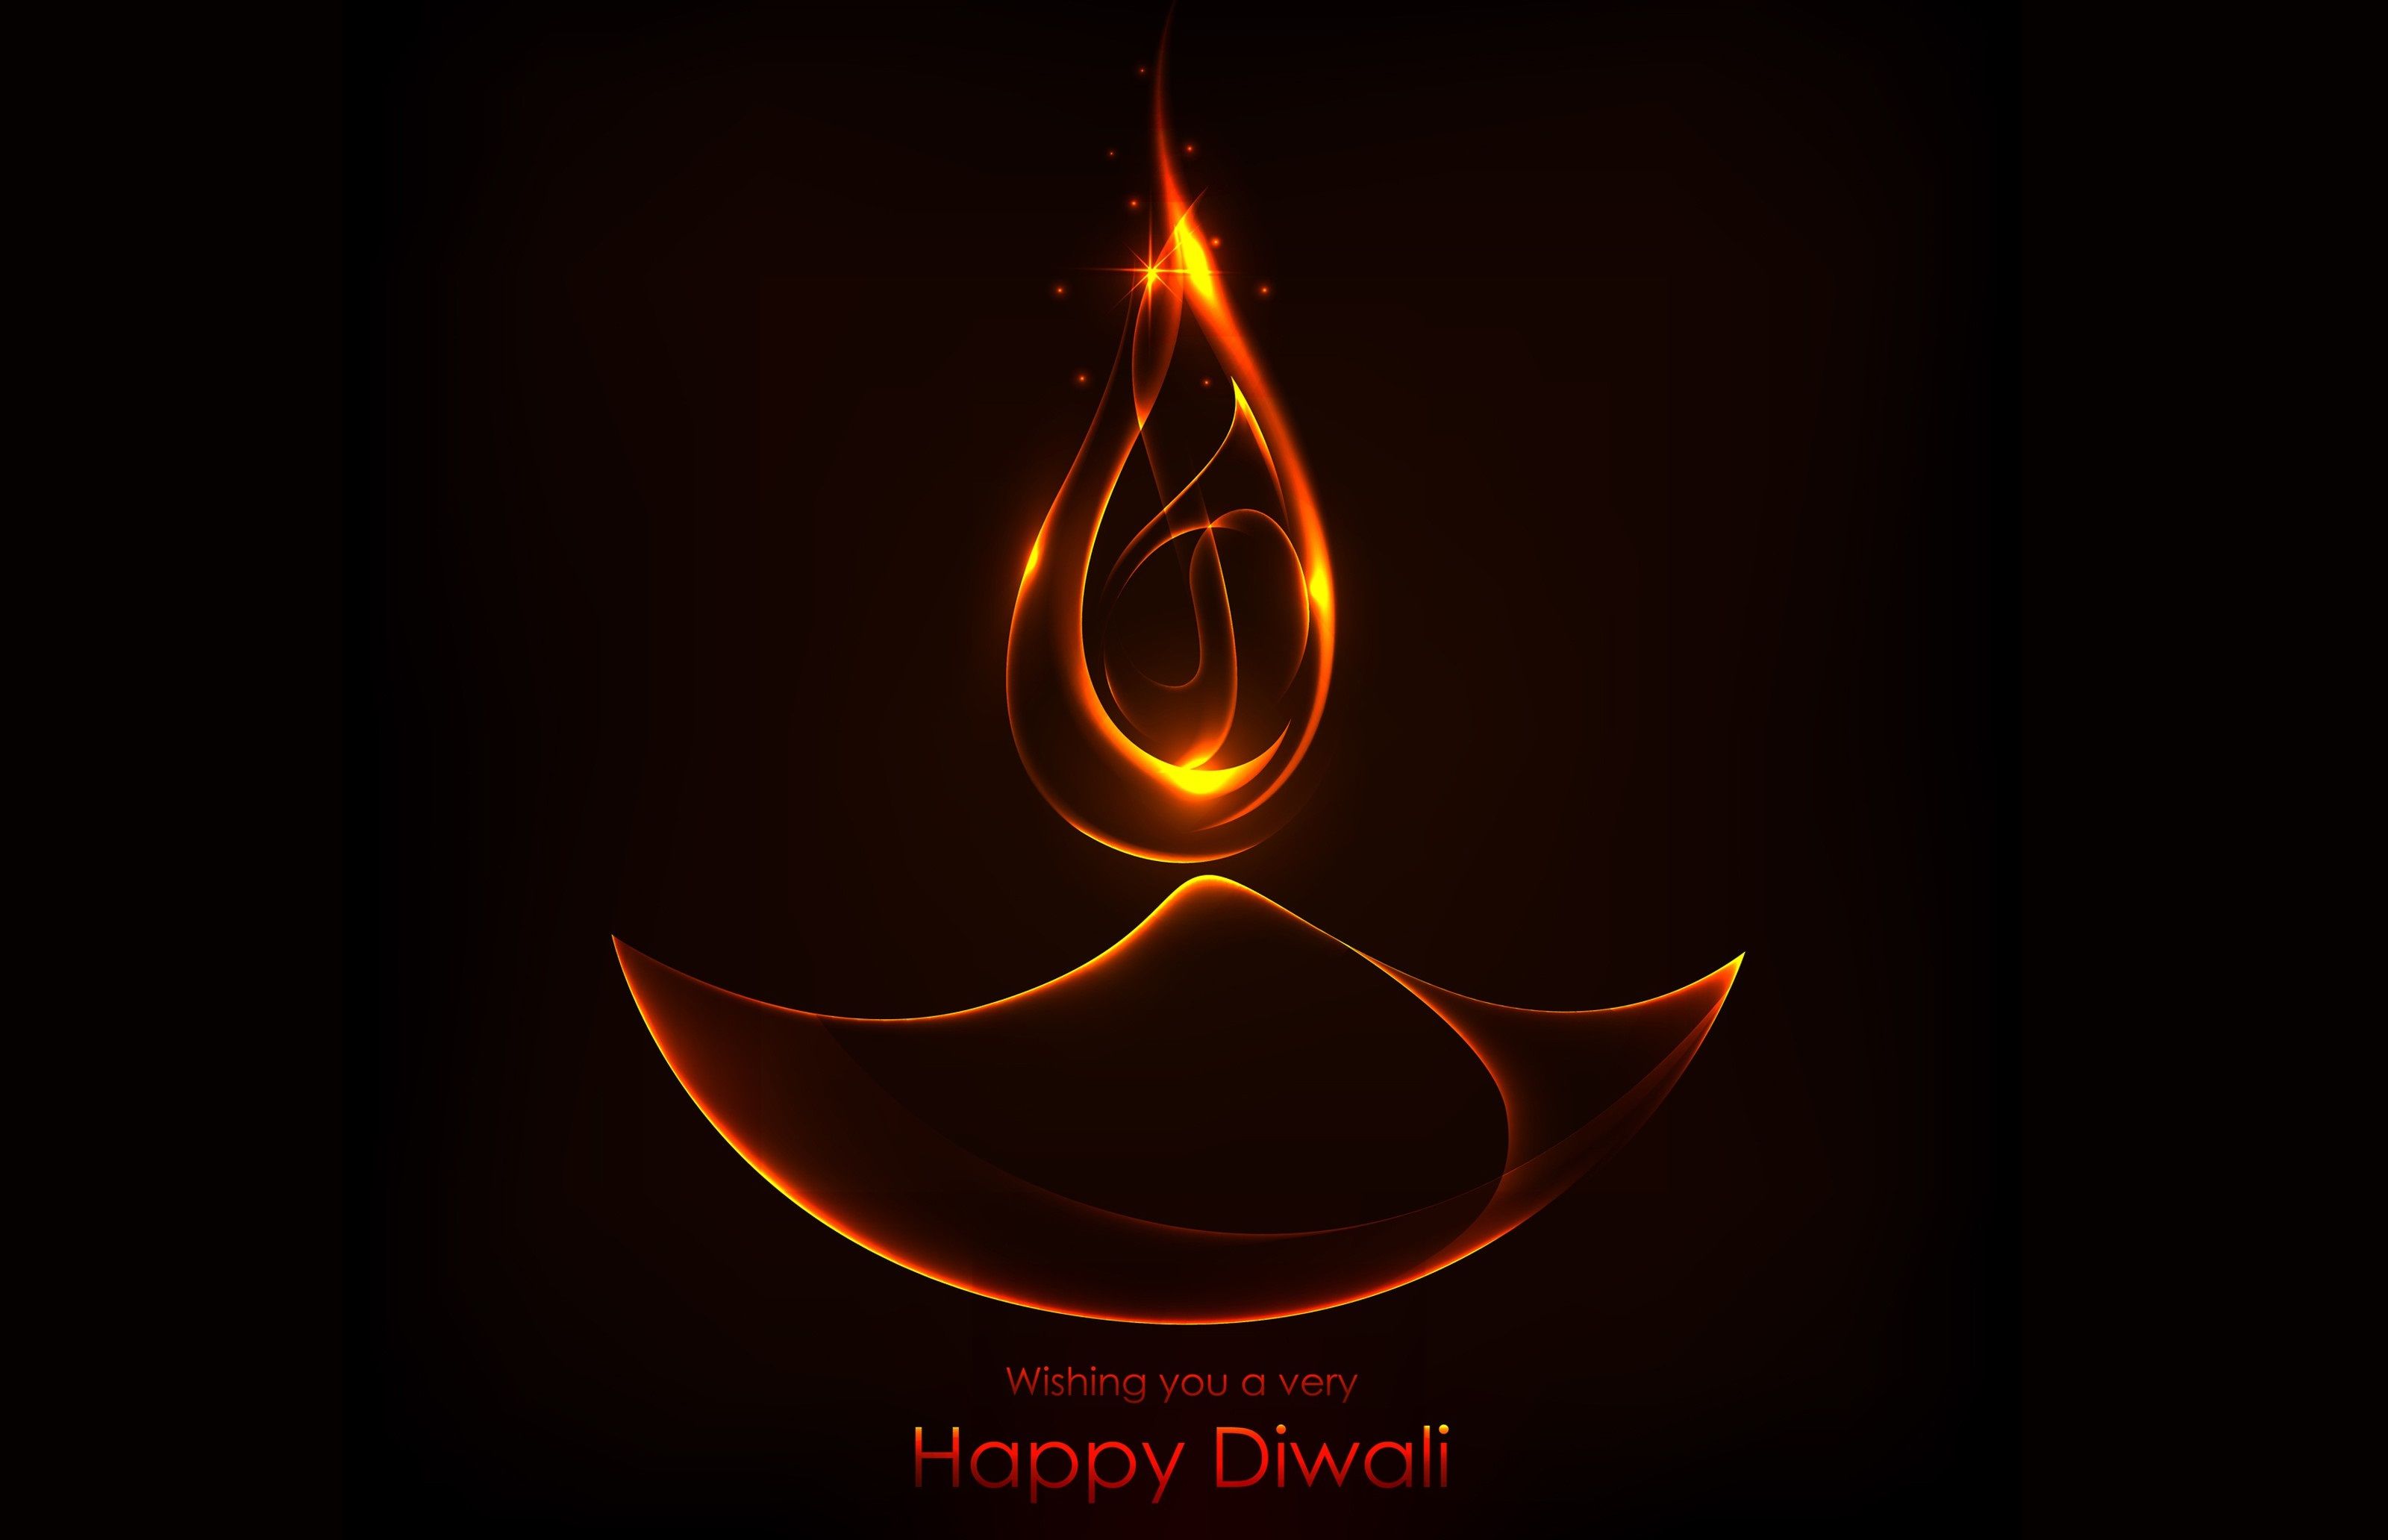 New Diwali Superb And Awesome HD Wallpapers For Desktop, Laptop